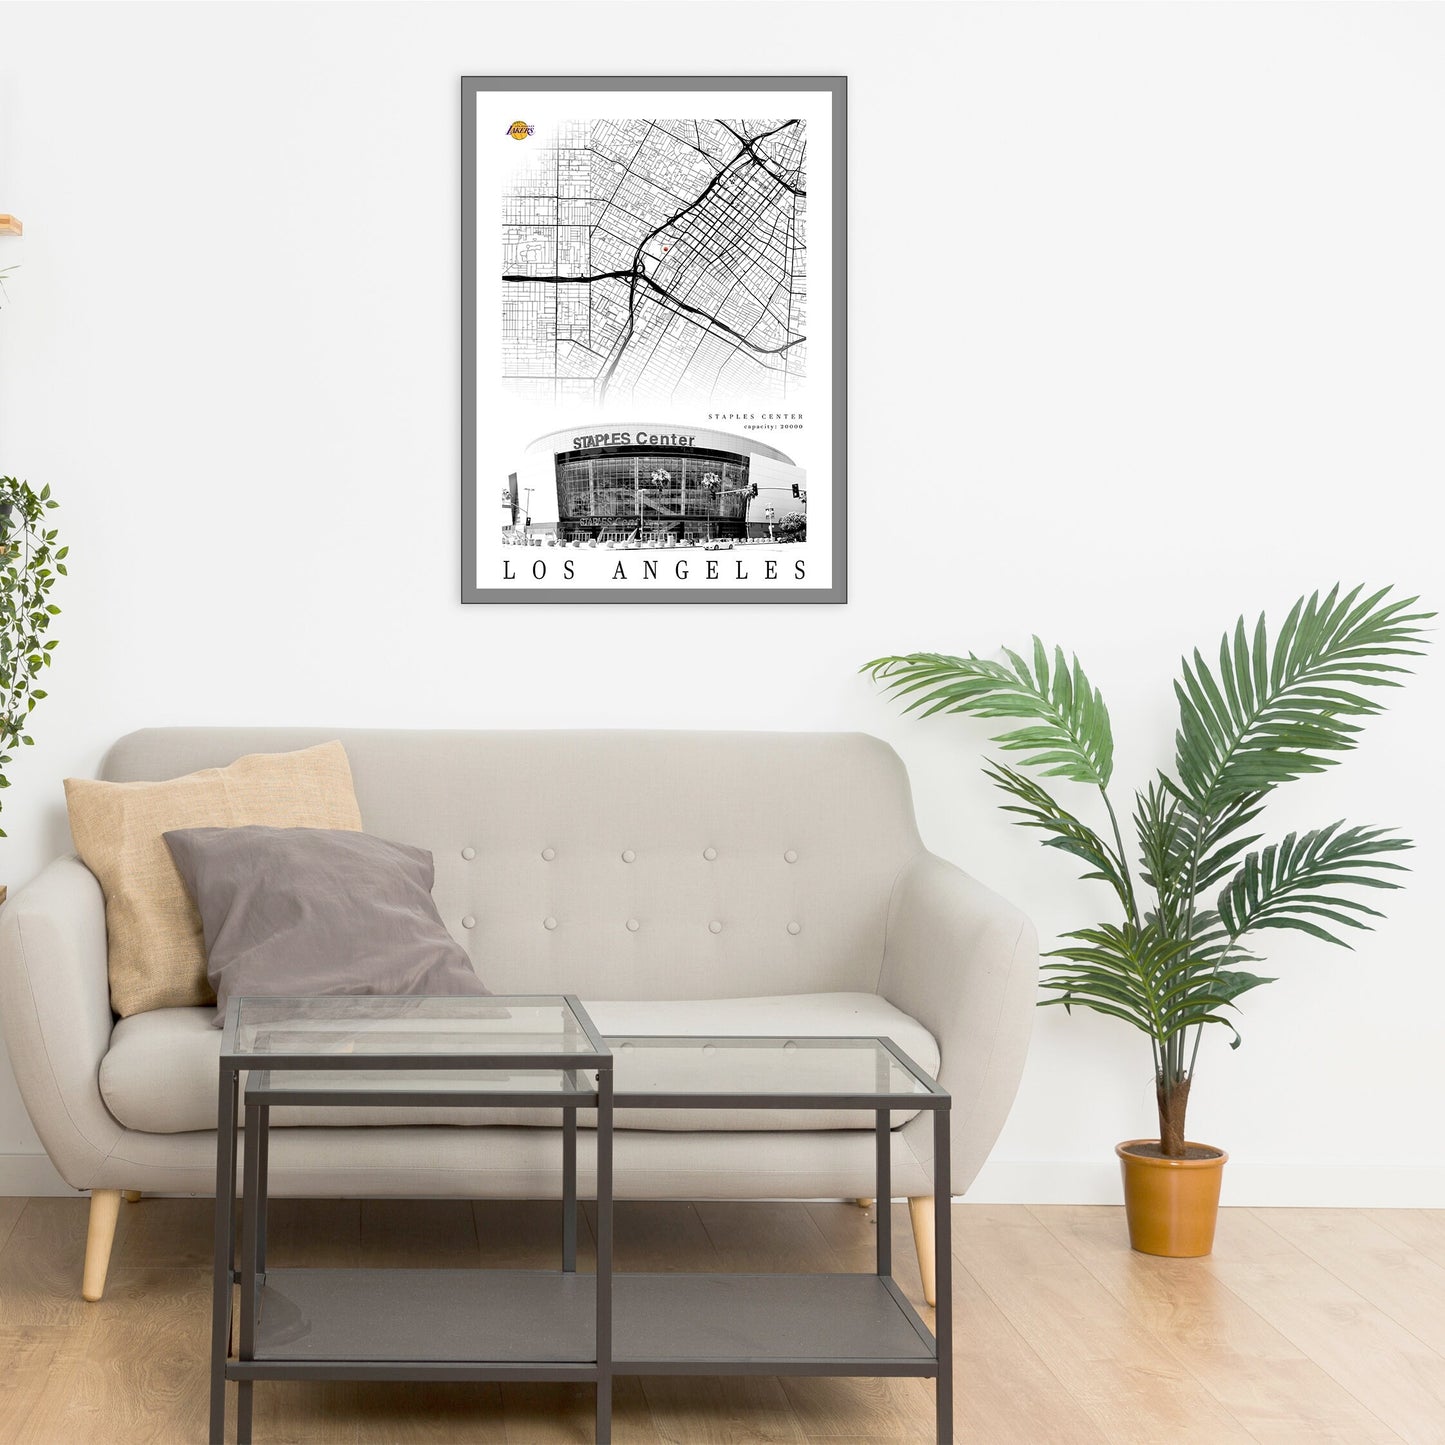 City map of LOS ANGELES - Staples Center - Home Decor Los Angeles - Staples Center wall decor - Los Angeles poster - Print map